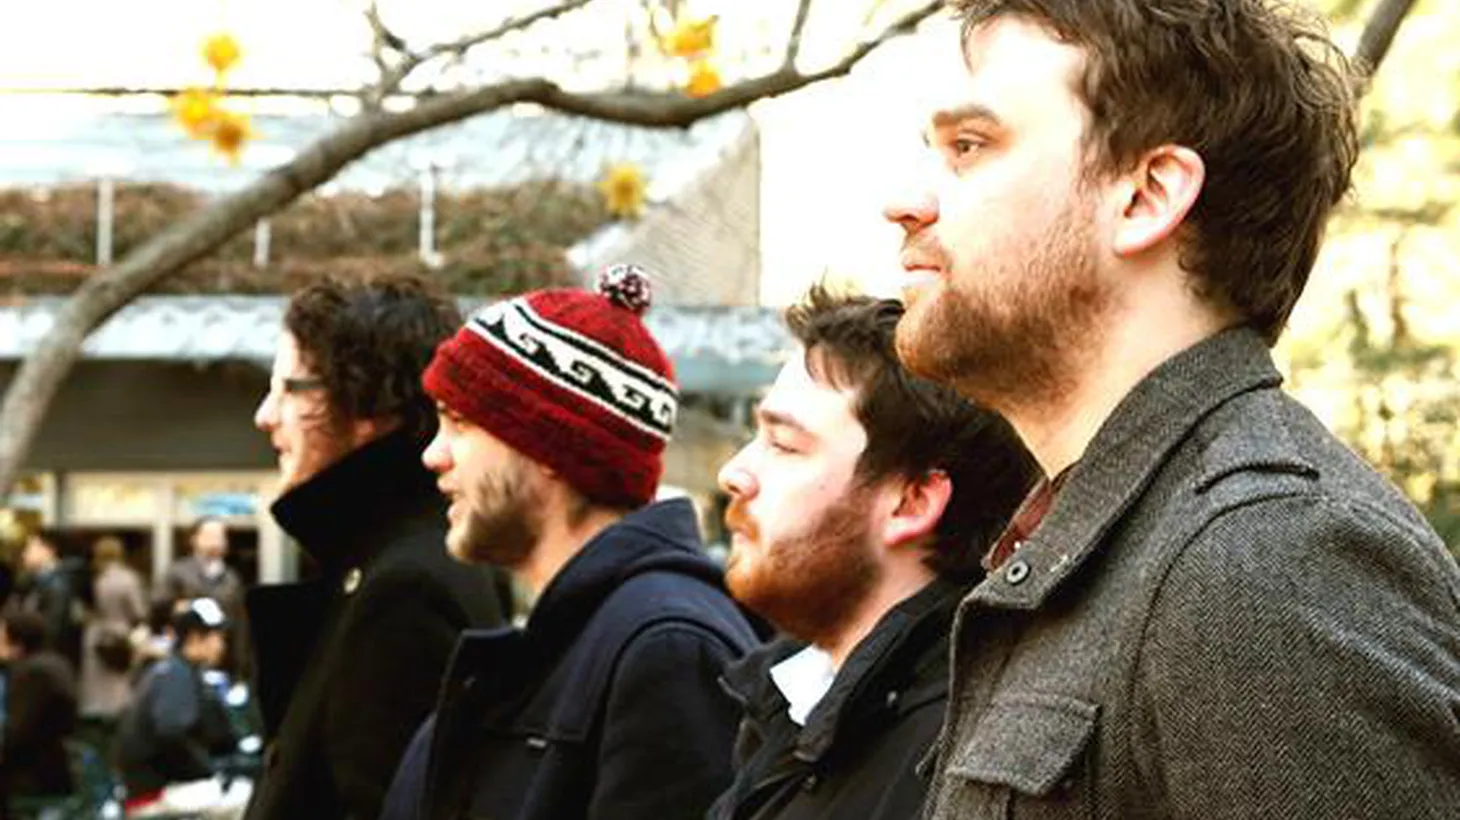 USA Today calls Scotland's Frightened Rabbit a "must-see act" and we'll get a chance to experience their anthemic, stadium-sized rock when they join Morning Becomes Eclectic for a live set at 11:15am.